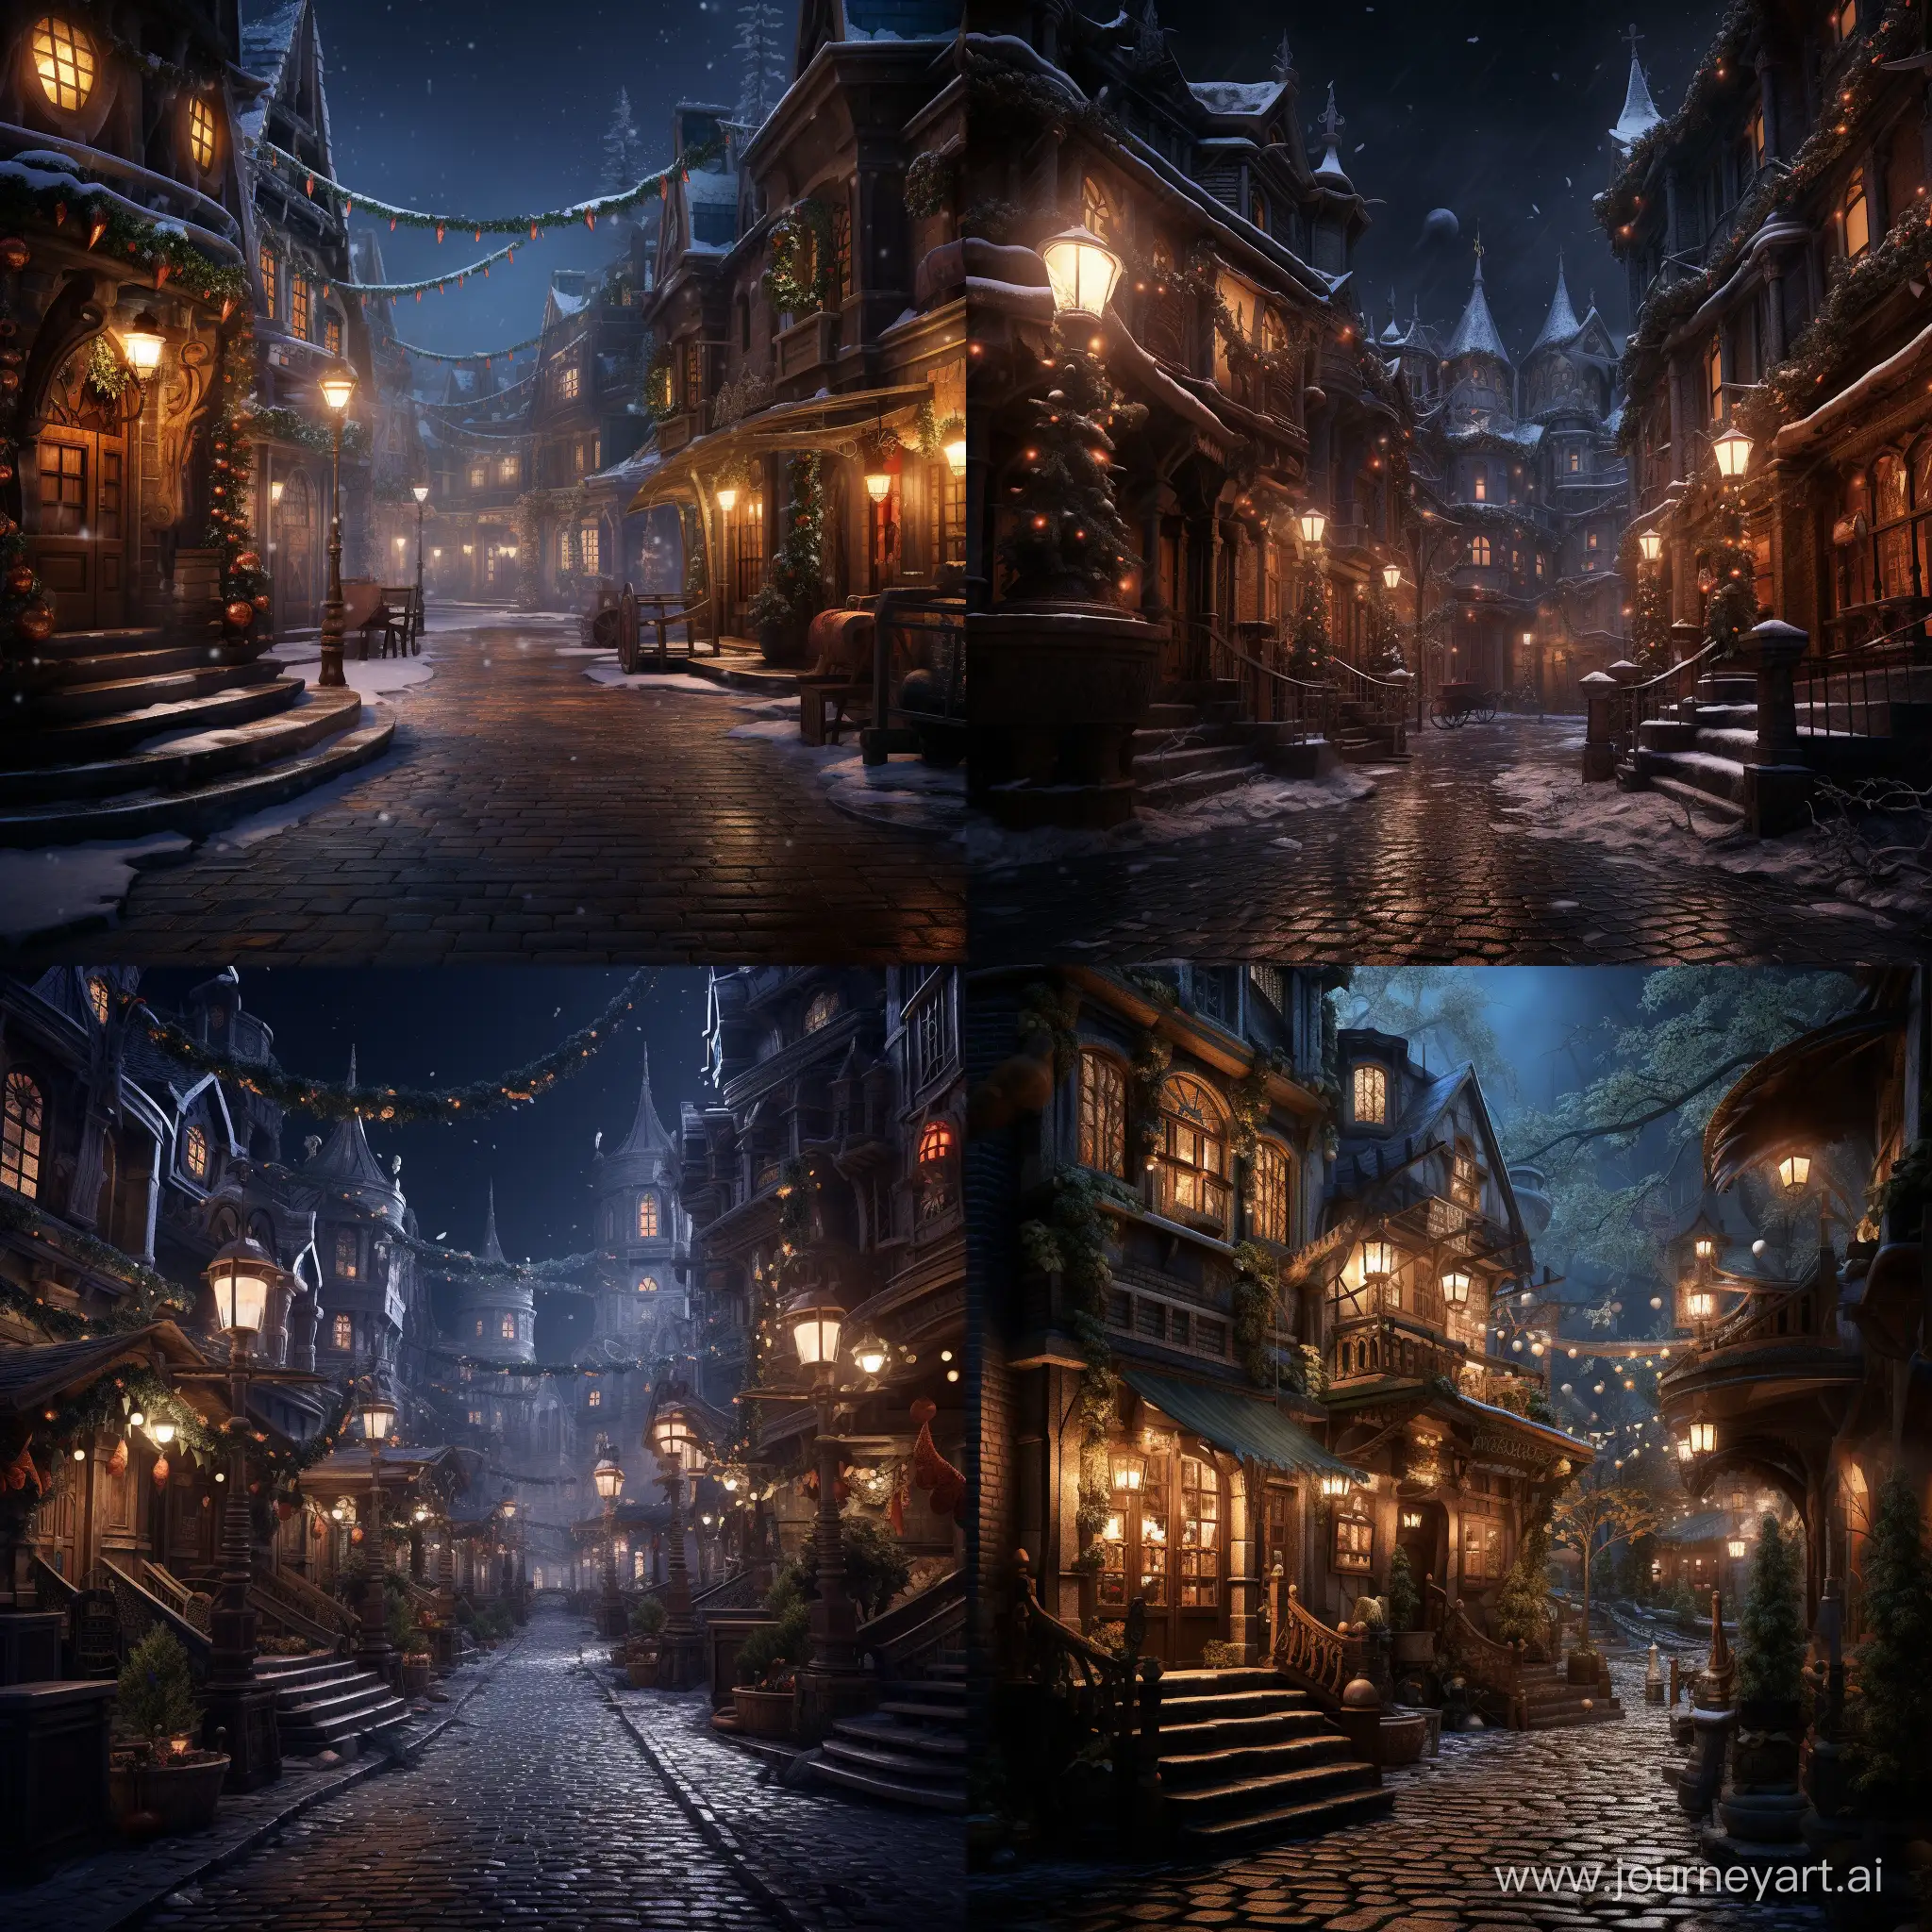 the street of the Christmas fantasy city,the city of elves and dwarves, in the style of the late Middle Ages with pipes and magic, night